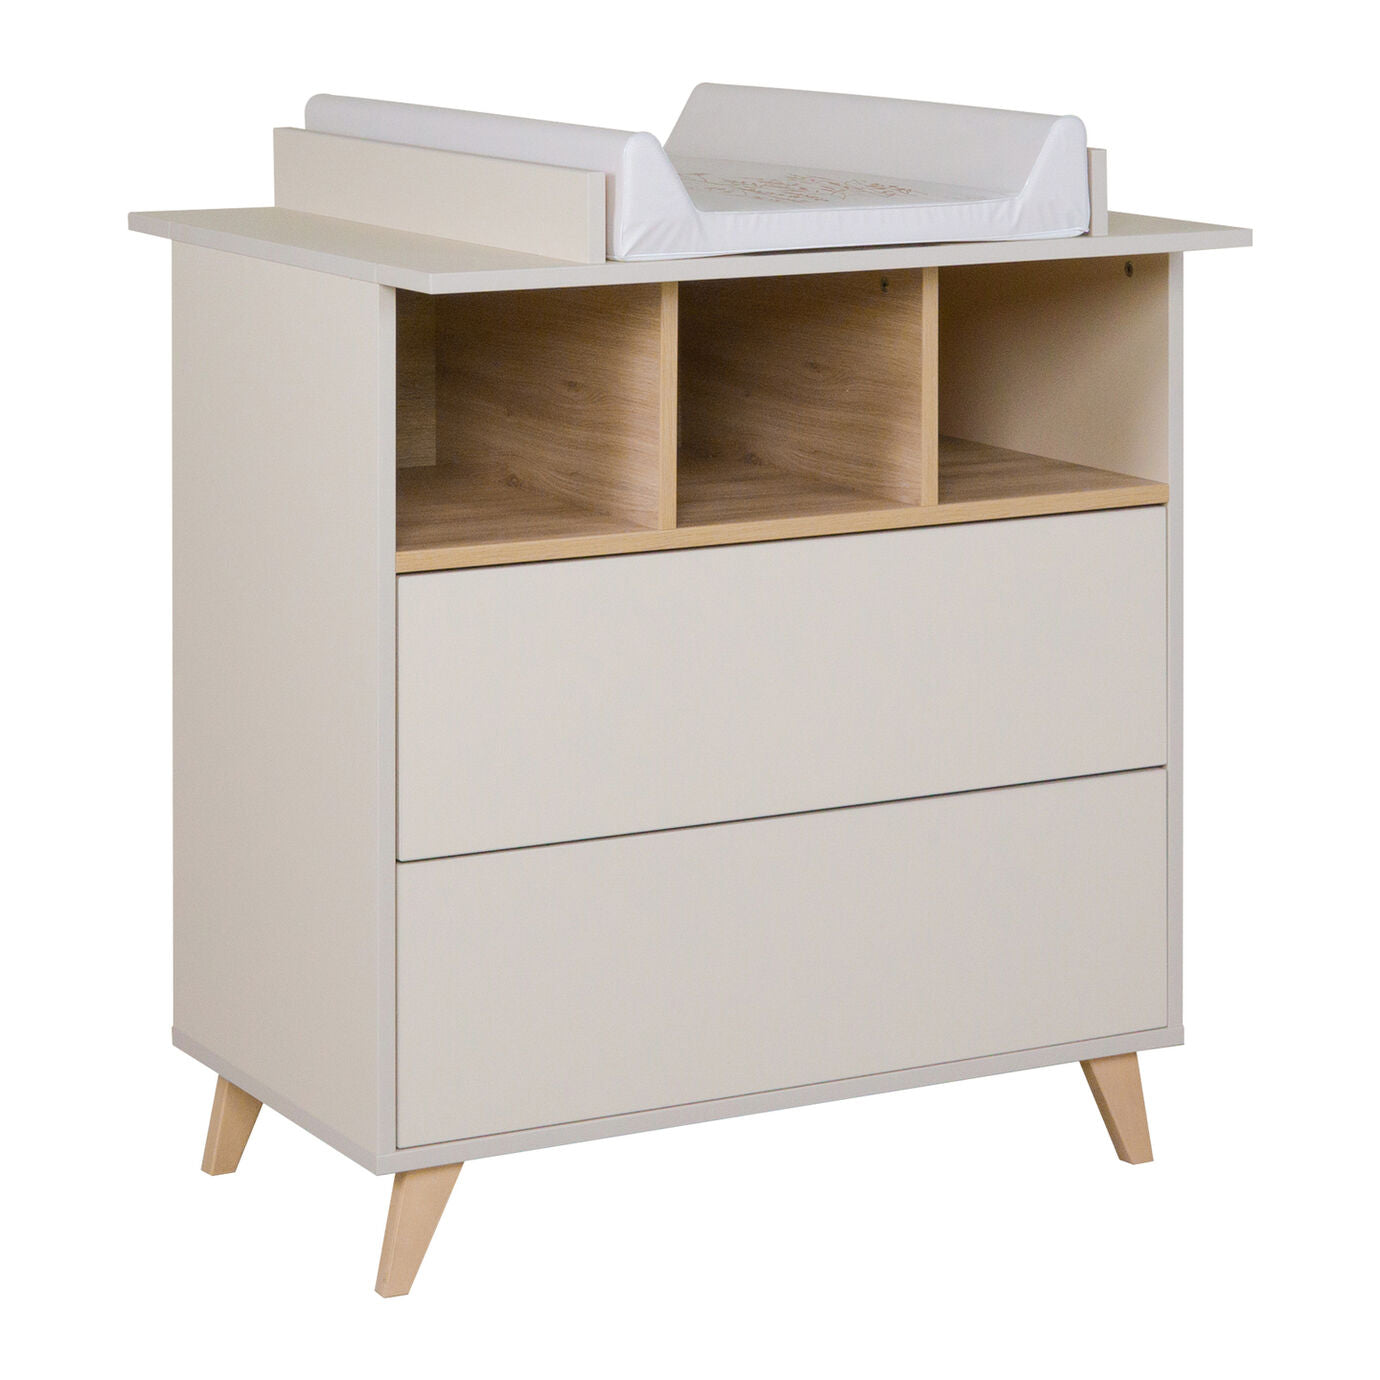 Quax Loft Commode Extension piece - Clay  - Hola BB